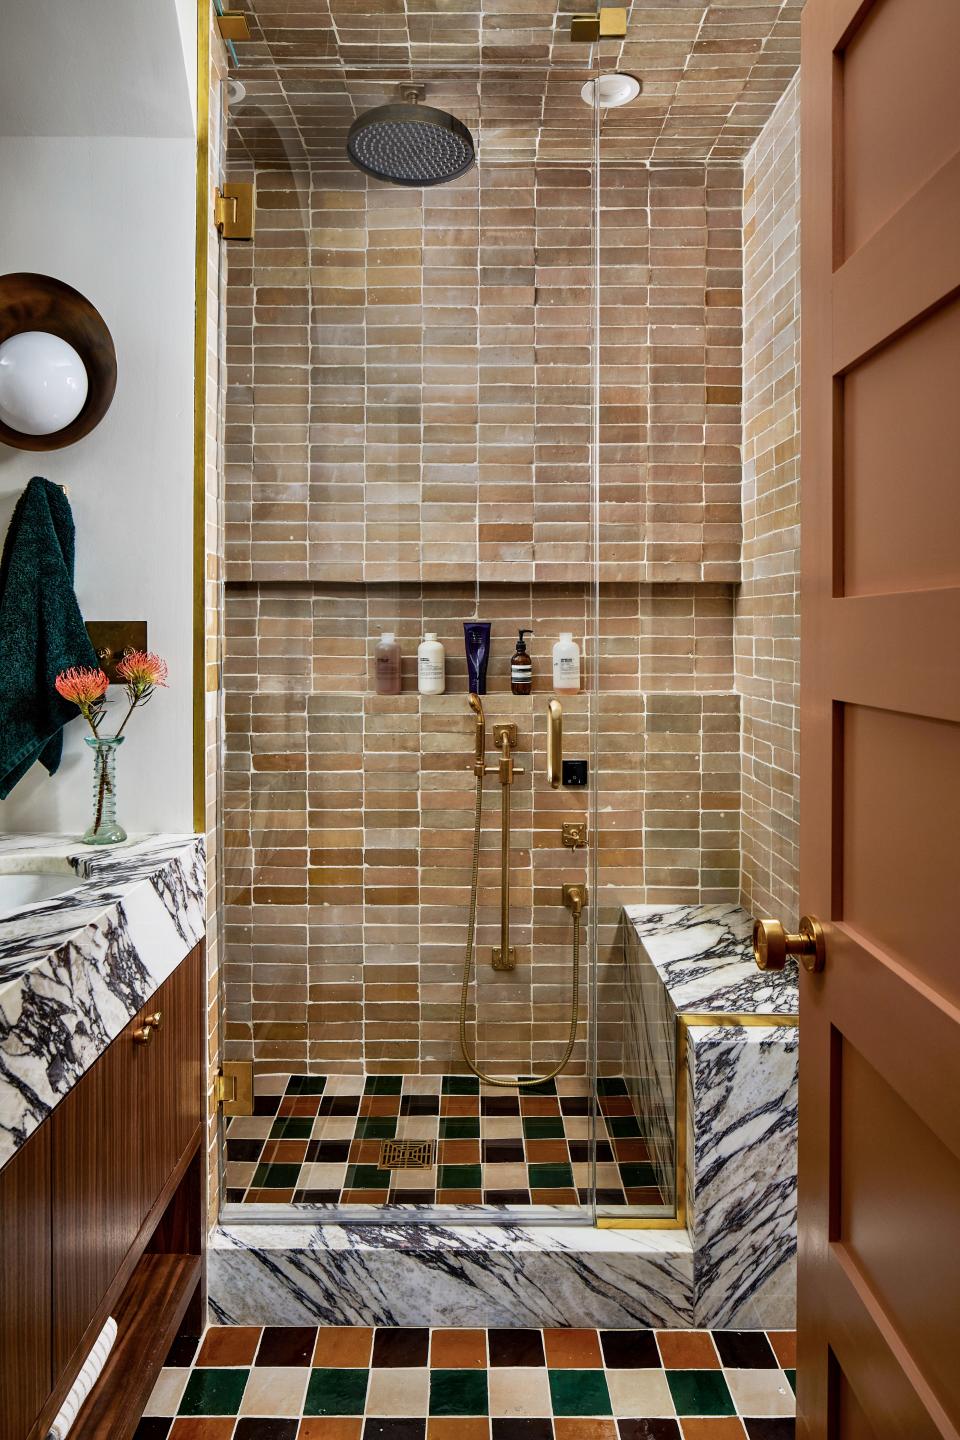 In the primary bath, Zoë dialed up the drama with outré details. One case in point? The floor, which she embellished with four-inch zellige floor tile from Clé, in the shades Golden Henna, Burnt Sugar, Cindered Olive, and Glazed Earth. She repeated the latter shade on the walls, in two-by-six tile by the same brand. “We love the palette of the tile against the marble, the elegant brass fixtures, and the luxurious steam unit. It’s a serene oasis where we can completely unwind,” says one husband. The custom walnut vanity by Fajen & Brown serves as a warm antithesis to the Calacatta Monet counter and surfaces. The wall sconce is Gallery L7’s Concha light.